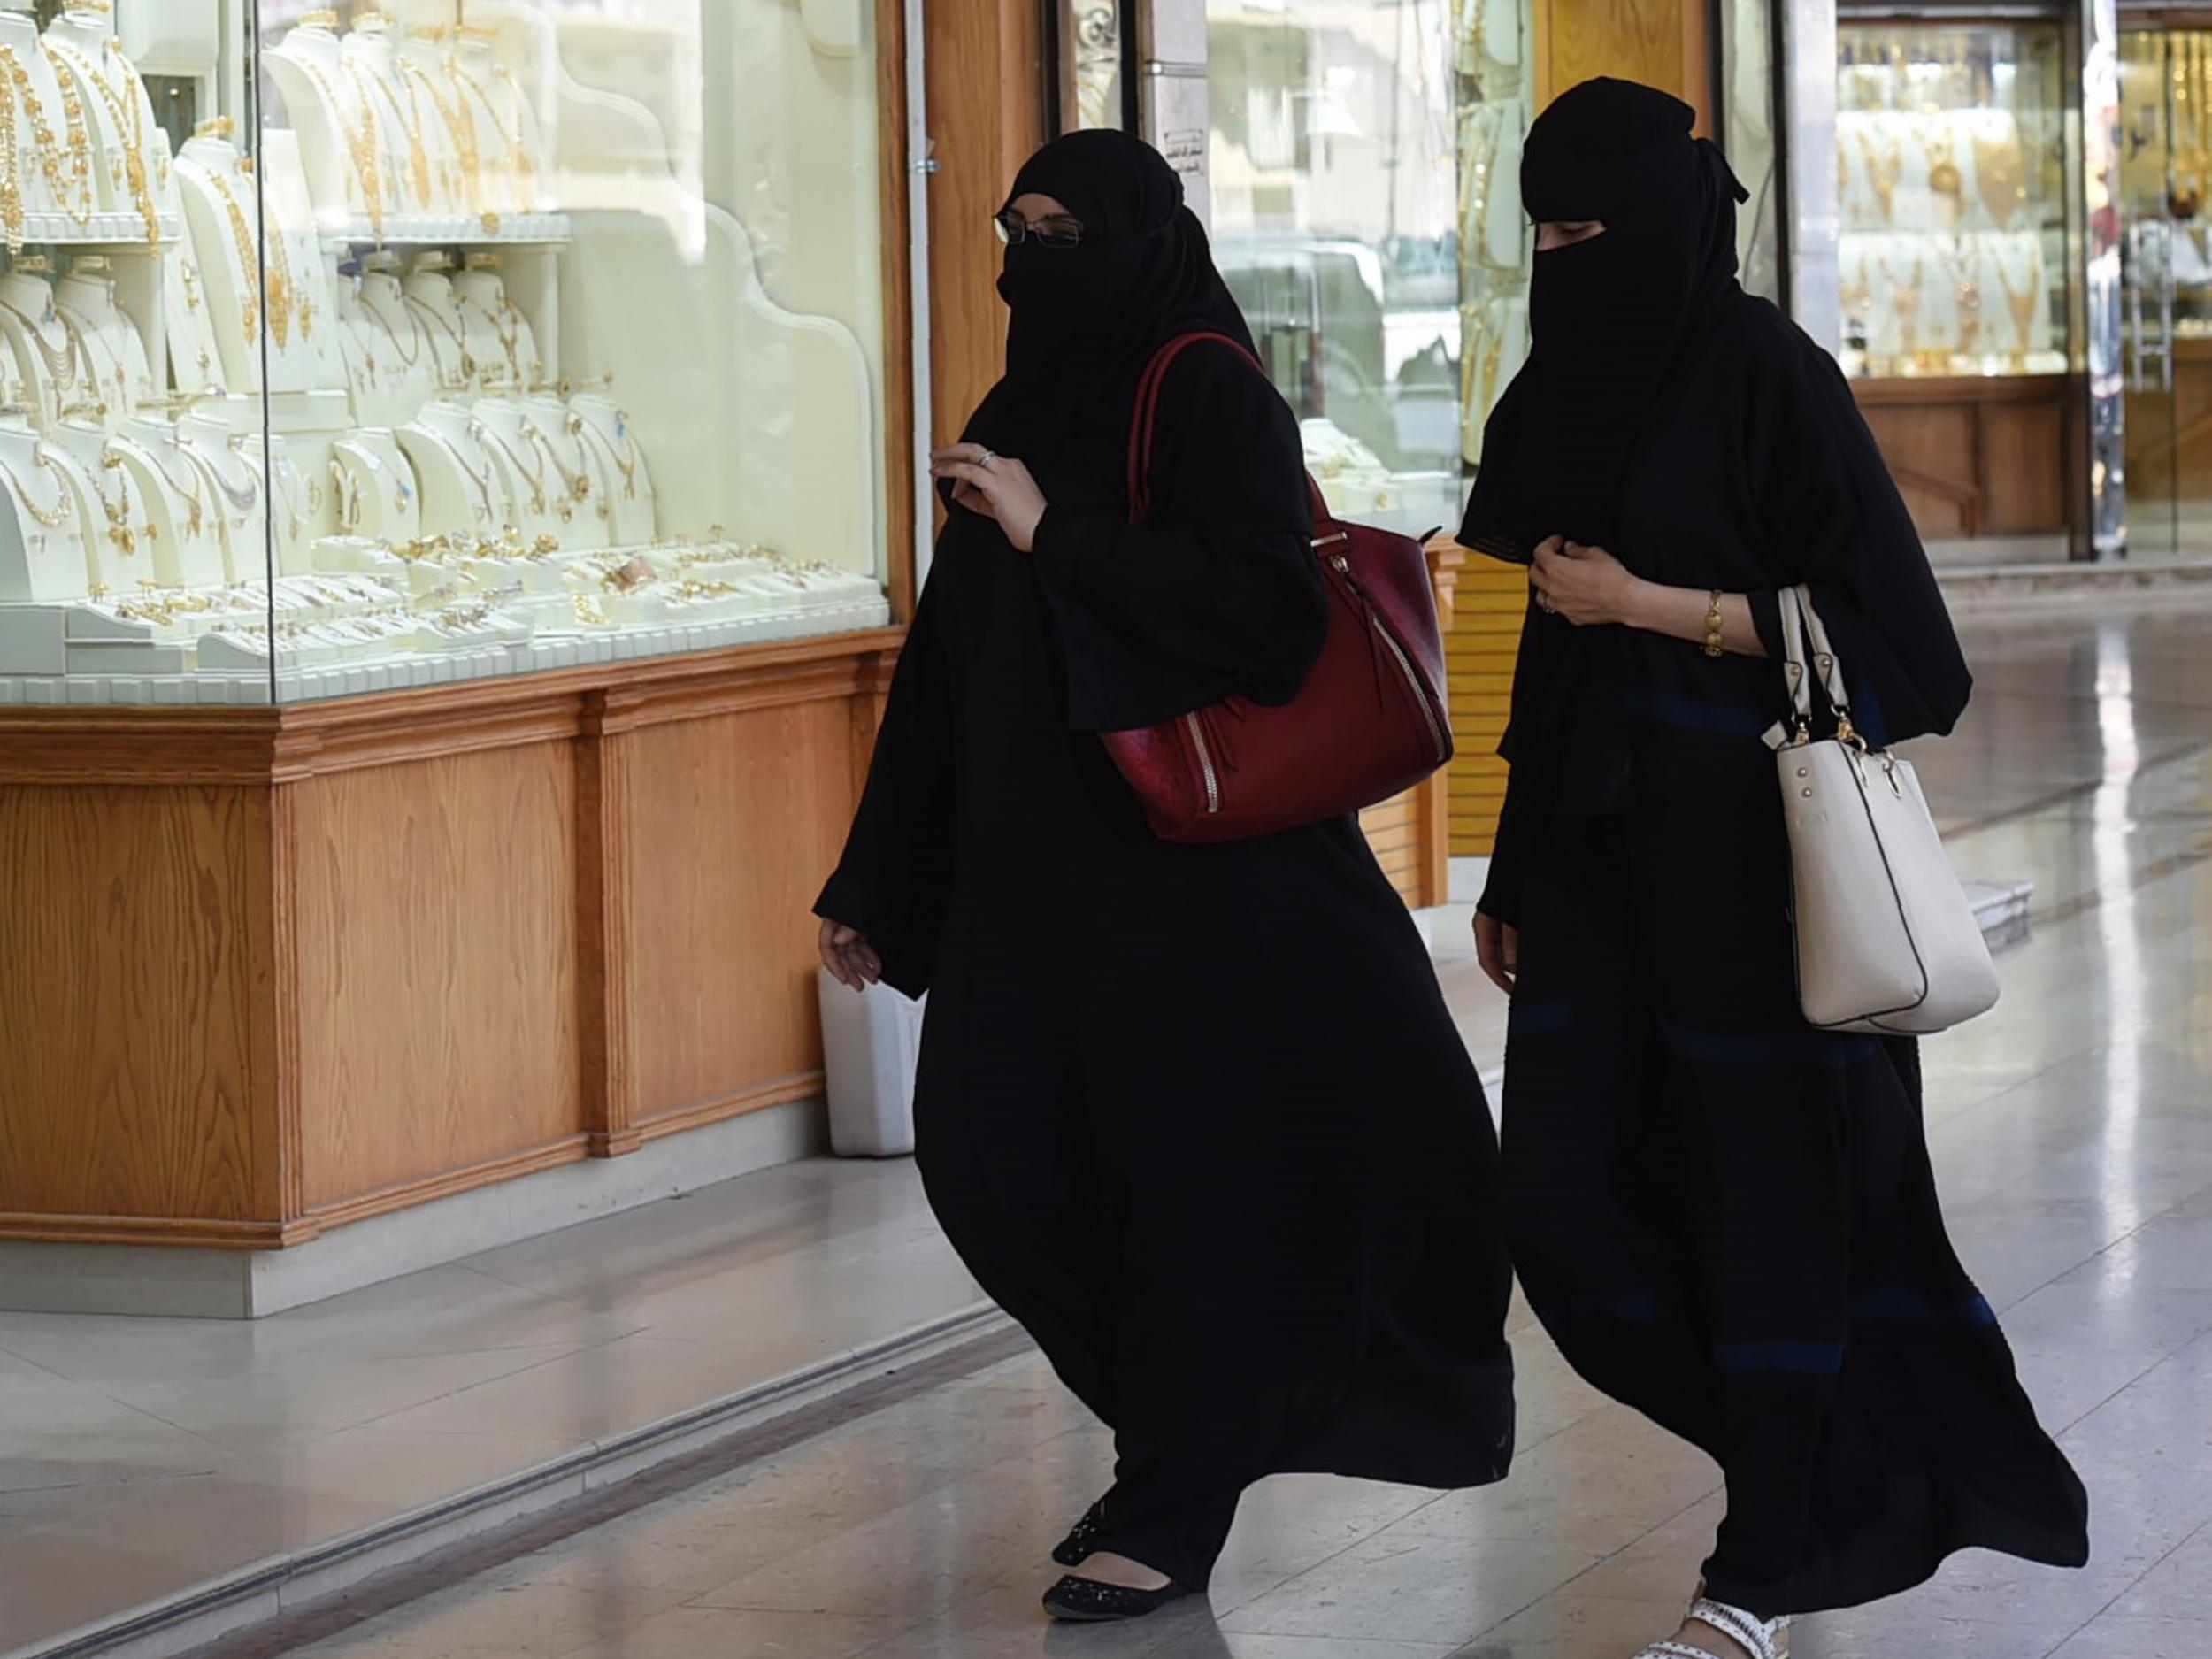 Many Saudi women must gain permission simply to leave their house